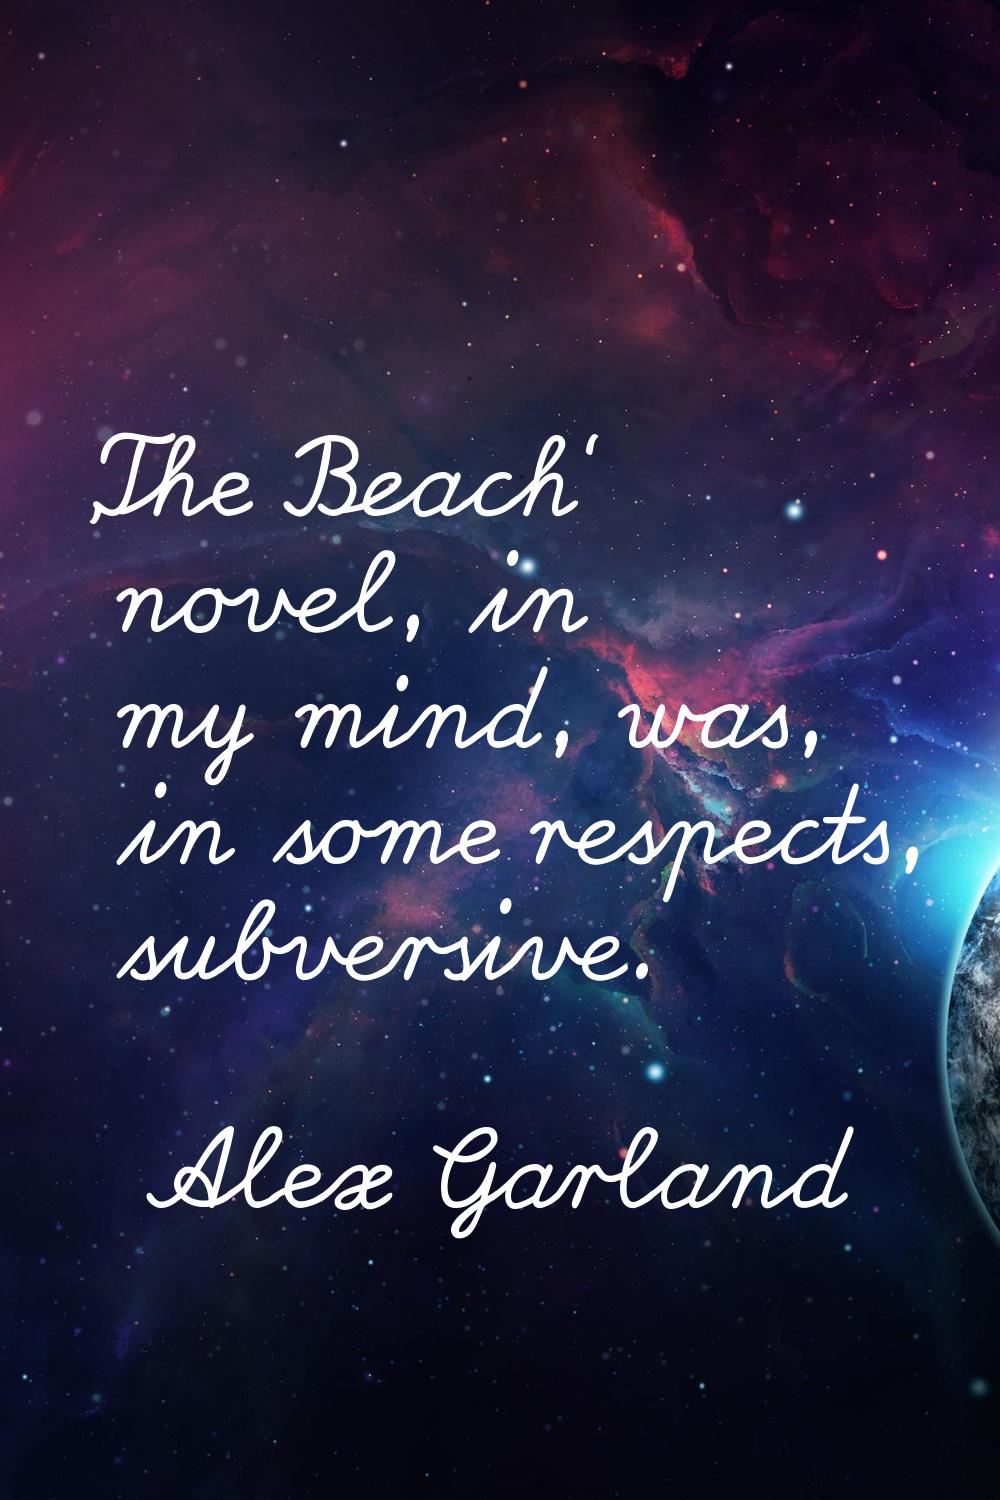 'The Beach' novel, in my mind, was, in some respects, subversive.